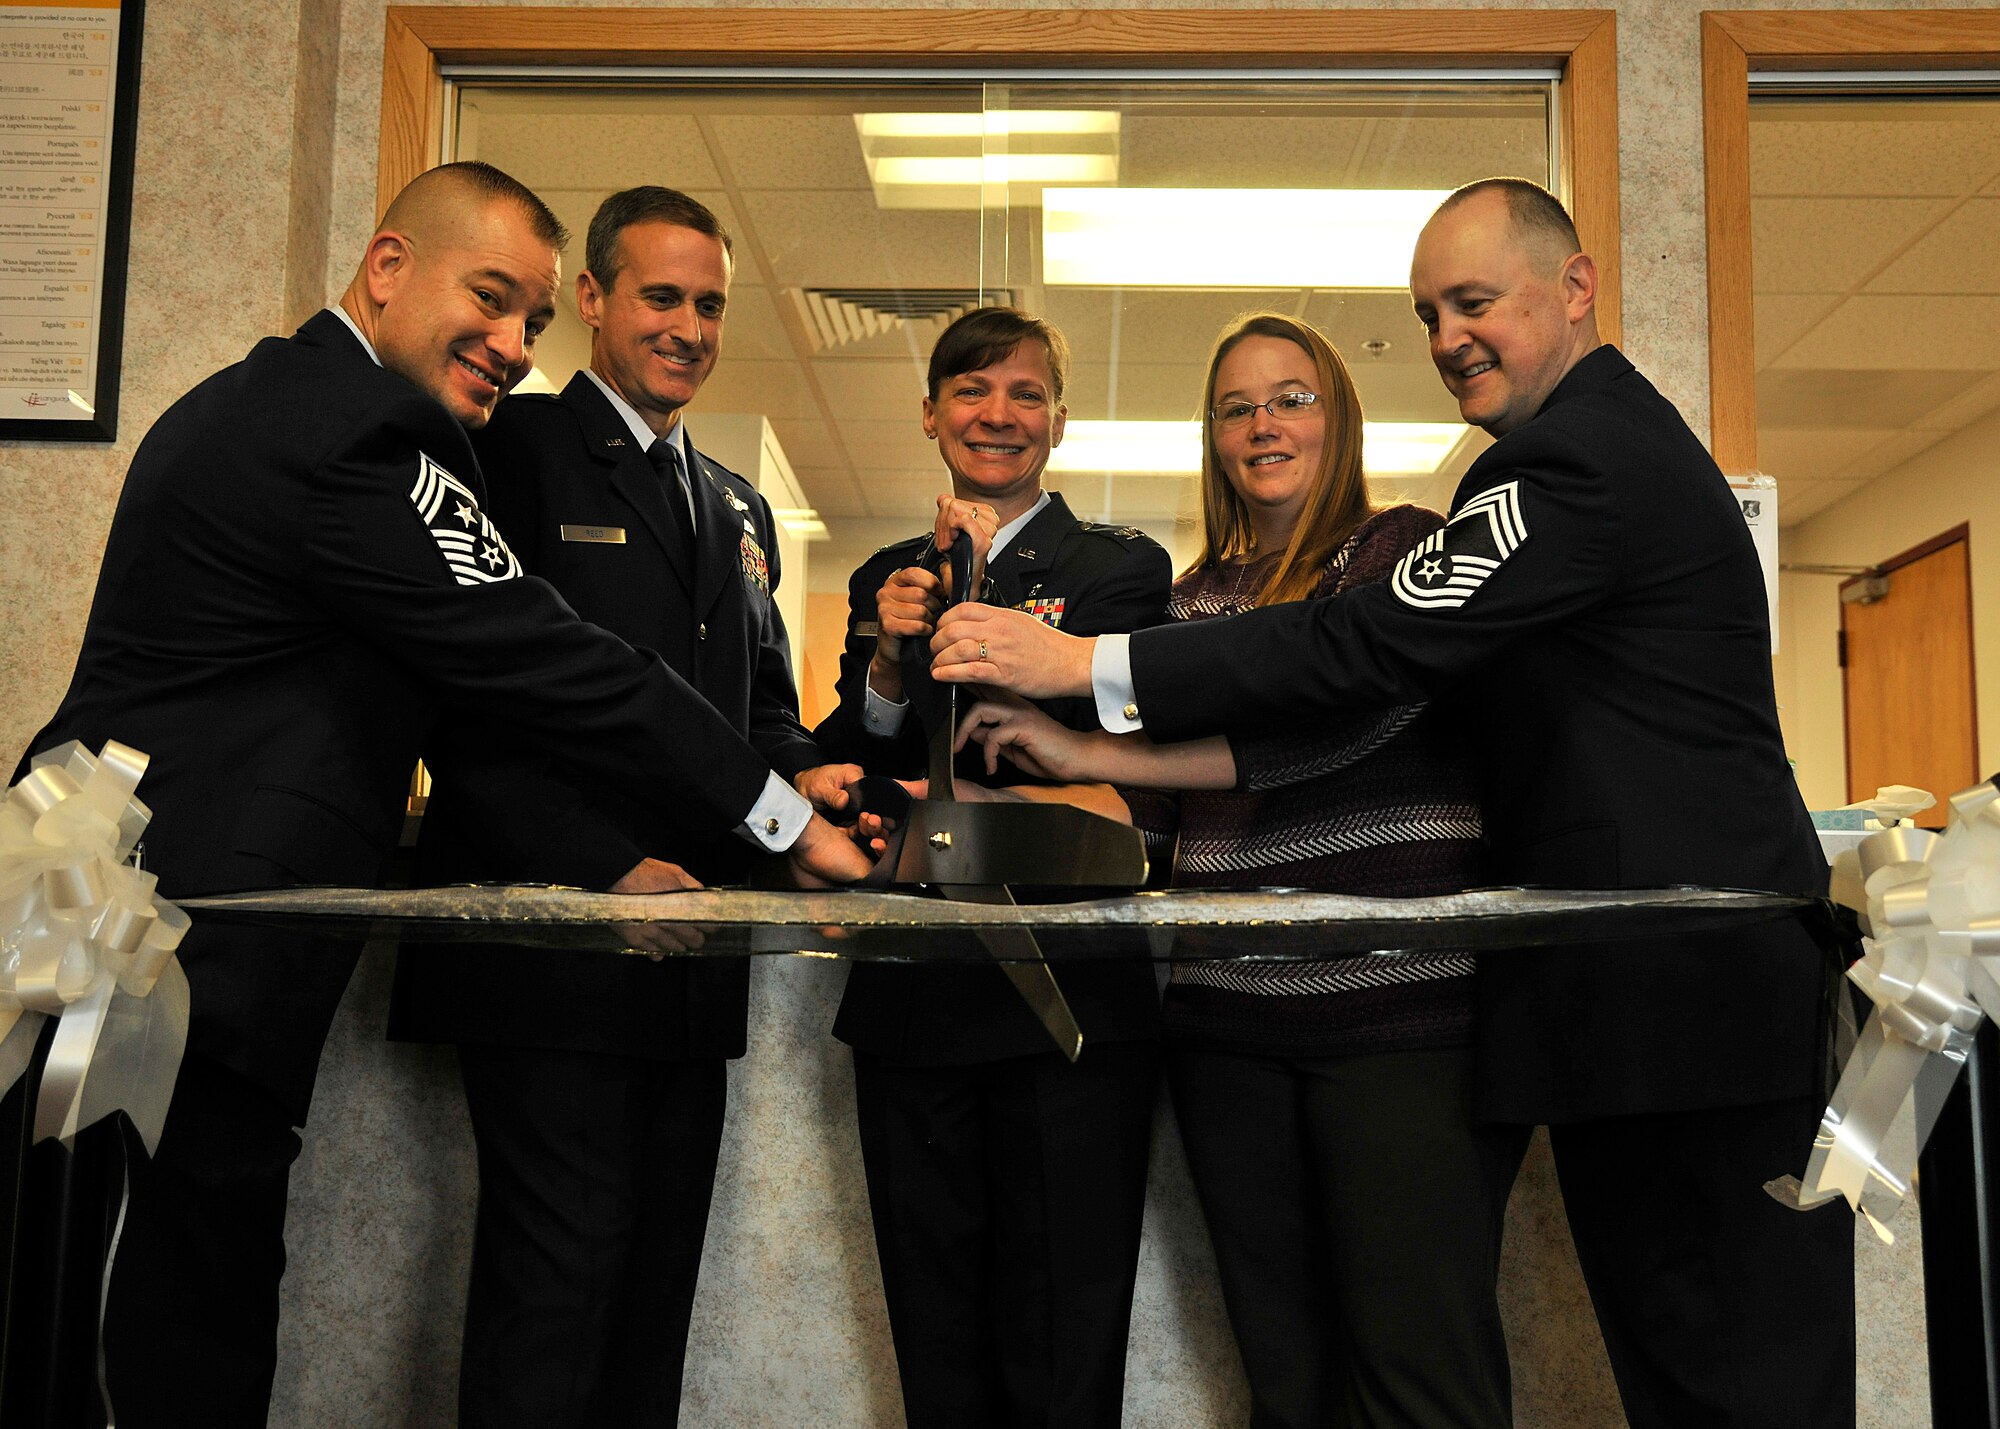 (left to right) Chief Master Sgt. Todd Krulcik, 319th Air Base Wing command chief, Col. Scott Reed, 319th ABW acting vice commander, Col. Therese Bohusch, 319th Medical Group commander, Amy McCauley, 319th MDG key spouse and Chief Master Sgt. Bryan Tuman, 319th MDG superintendent, cut the ribbon at the grand opening of the newly renovated Medical Treatment Facility on Grand Forks Air Force Base, North Dakota, Jan. 27, 2016. The $10 million renovation project included upgraded ventilation systems and a new main patient check-in area. (U.S. Air Force photo by Senior Airman Xavier Navarro/Released)